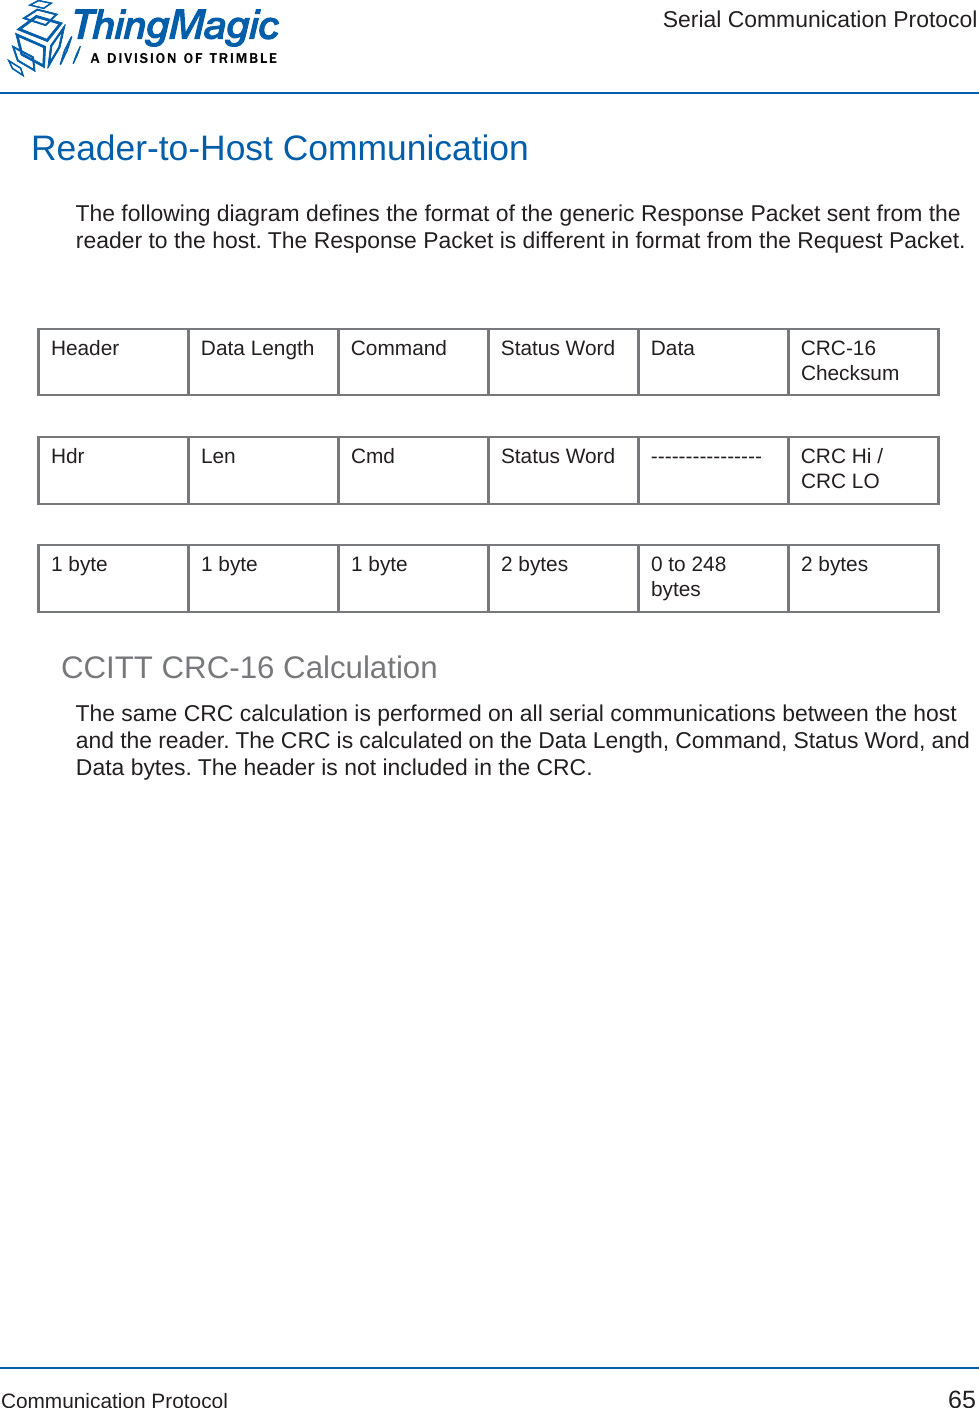 Serial Communication ProtocolA DIVISION OF TRIMBLECommunication Protocol 65Reader-to-Host CommunicationThe following diagram defines the format of the generic Response Packet sent from the reader to the host. The Response Packet is different in format from the Request Packet.CCITT CRC-16 CalculationThe same CRC calculation is performed on all serial communications between the host and the reader. The CRC is calculated on the Data Length, Command, Status Word, and Data bytes. The header is not included in the CRC.Header Data Length Command Status Word Data CRC-16ChecksumHdr Len Cmd Status Word ---------------- CRC Hi / CRC LO1 byte 1 byte 1 byte 2 bytes 0 to 248 bytes 2 bytes